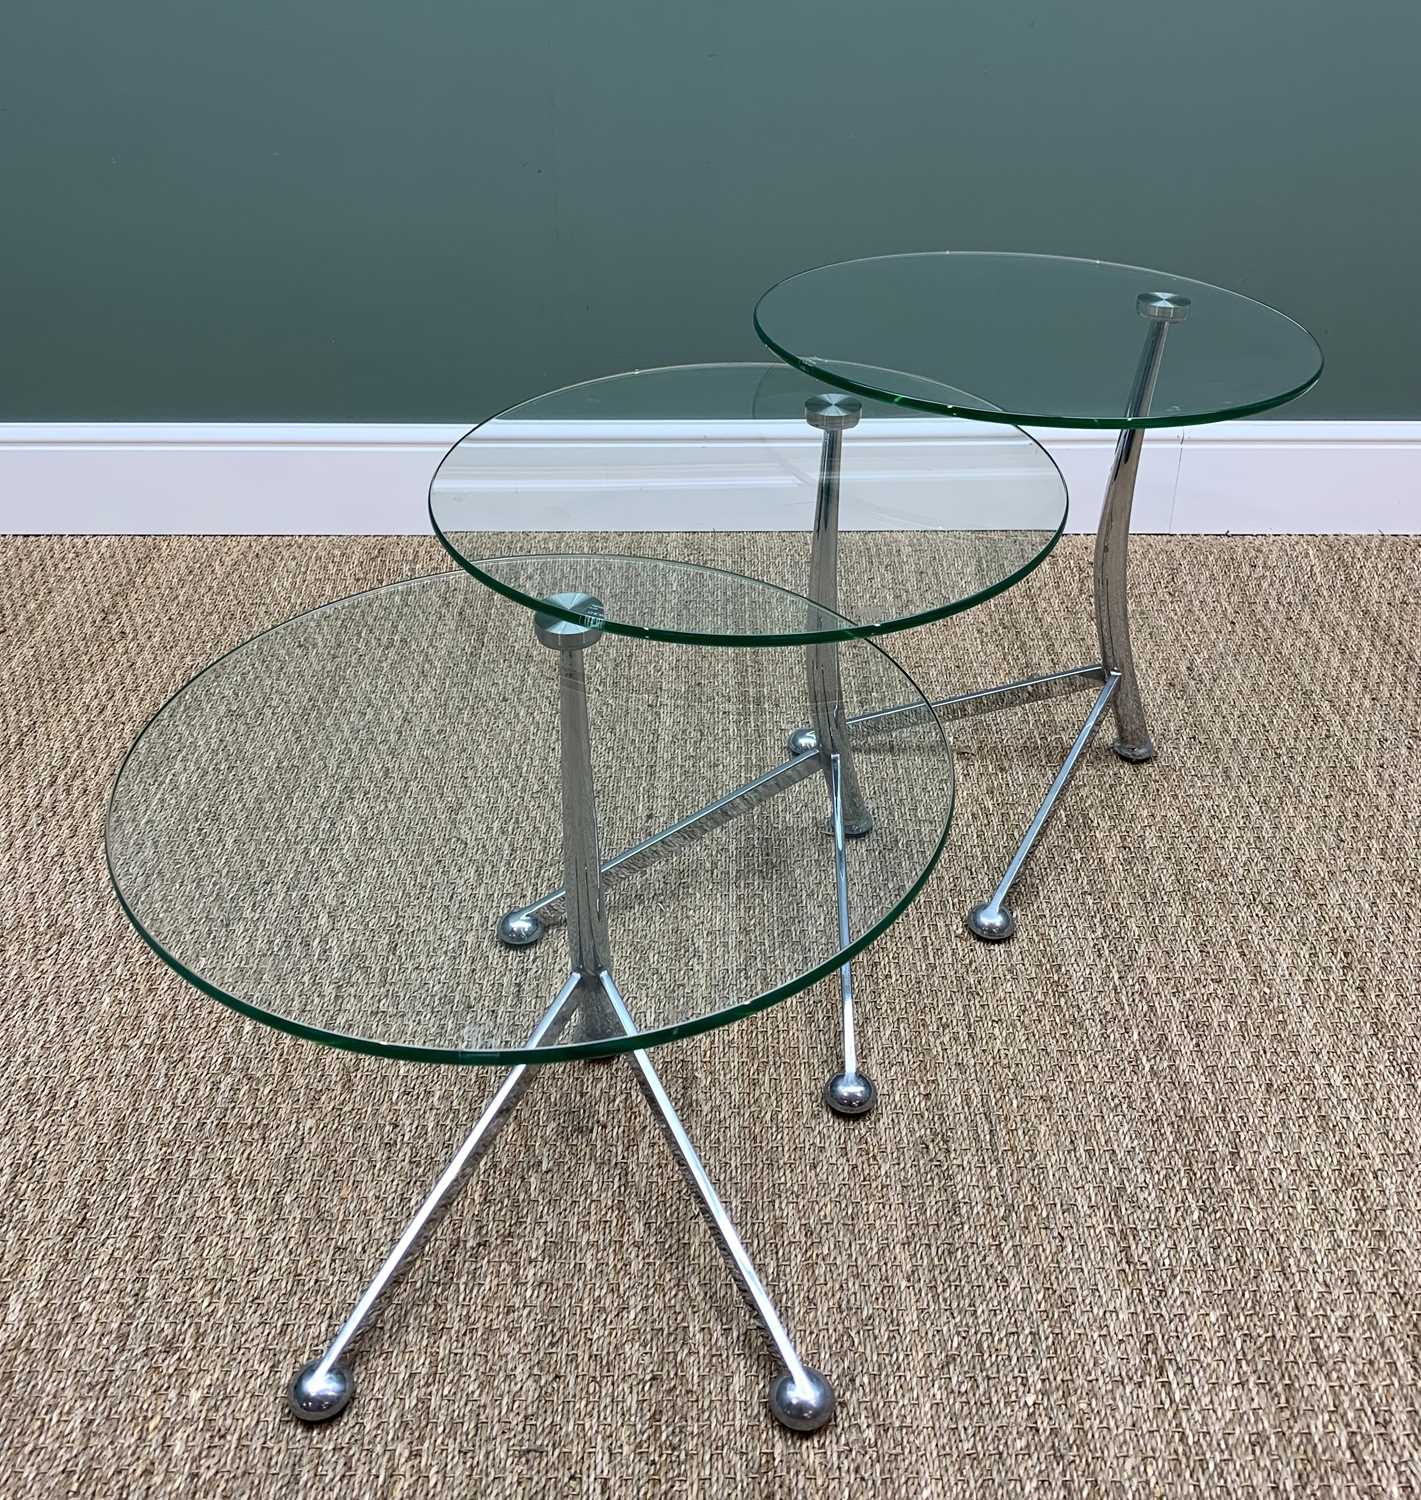 NEST OF THREE MODERN CHROME & GLASS OCCASIONAL TABLES, by So'home Designs, each 50cms diameter (3)